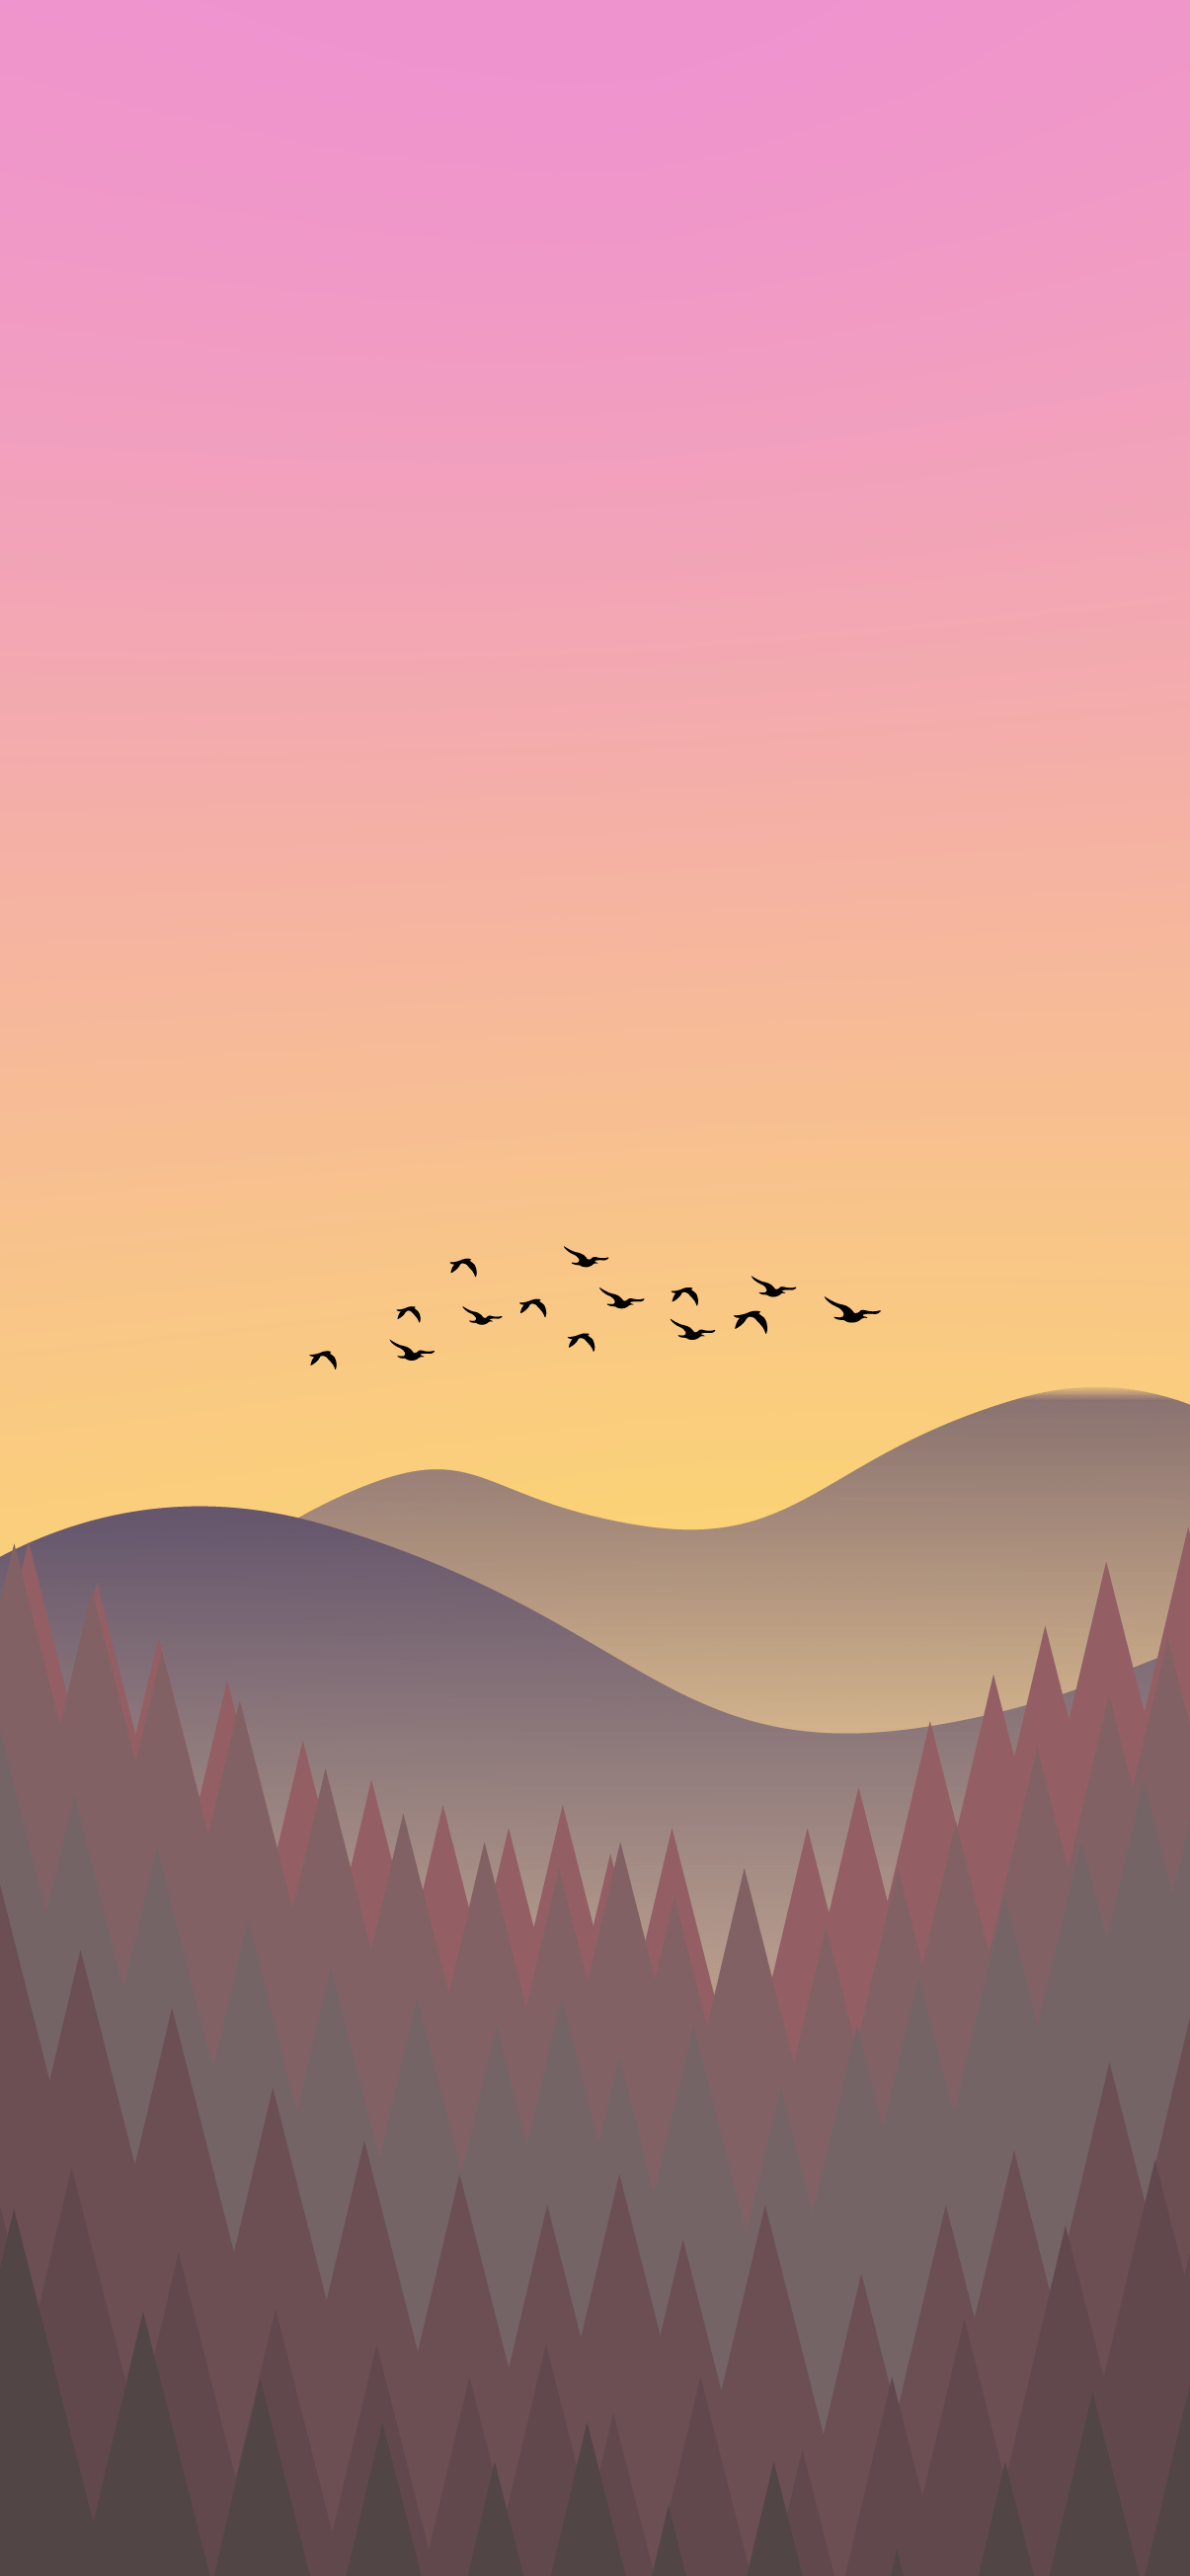 A graphic of a sunset with birds flying over a forest - Minimalist